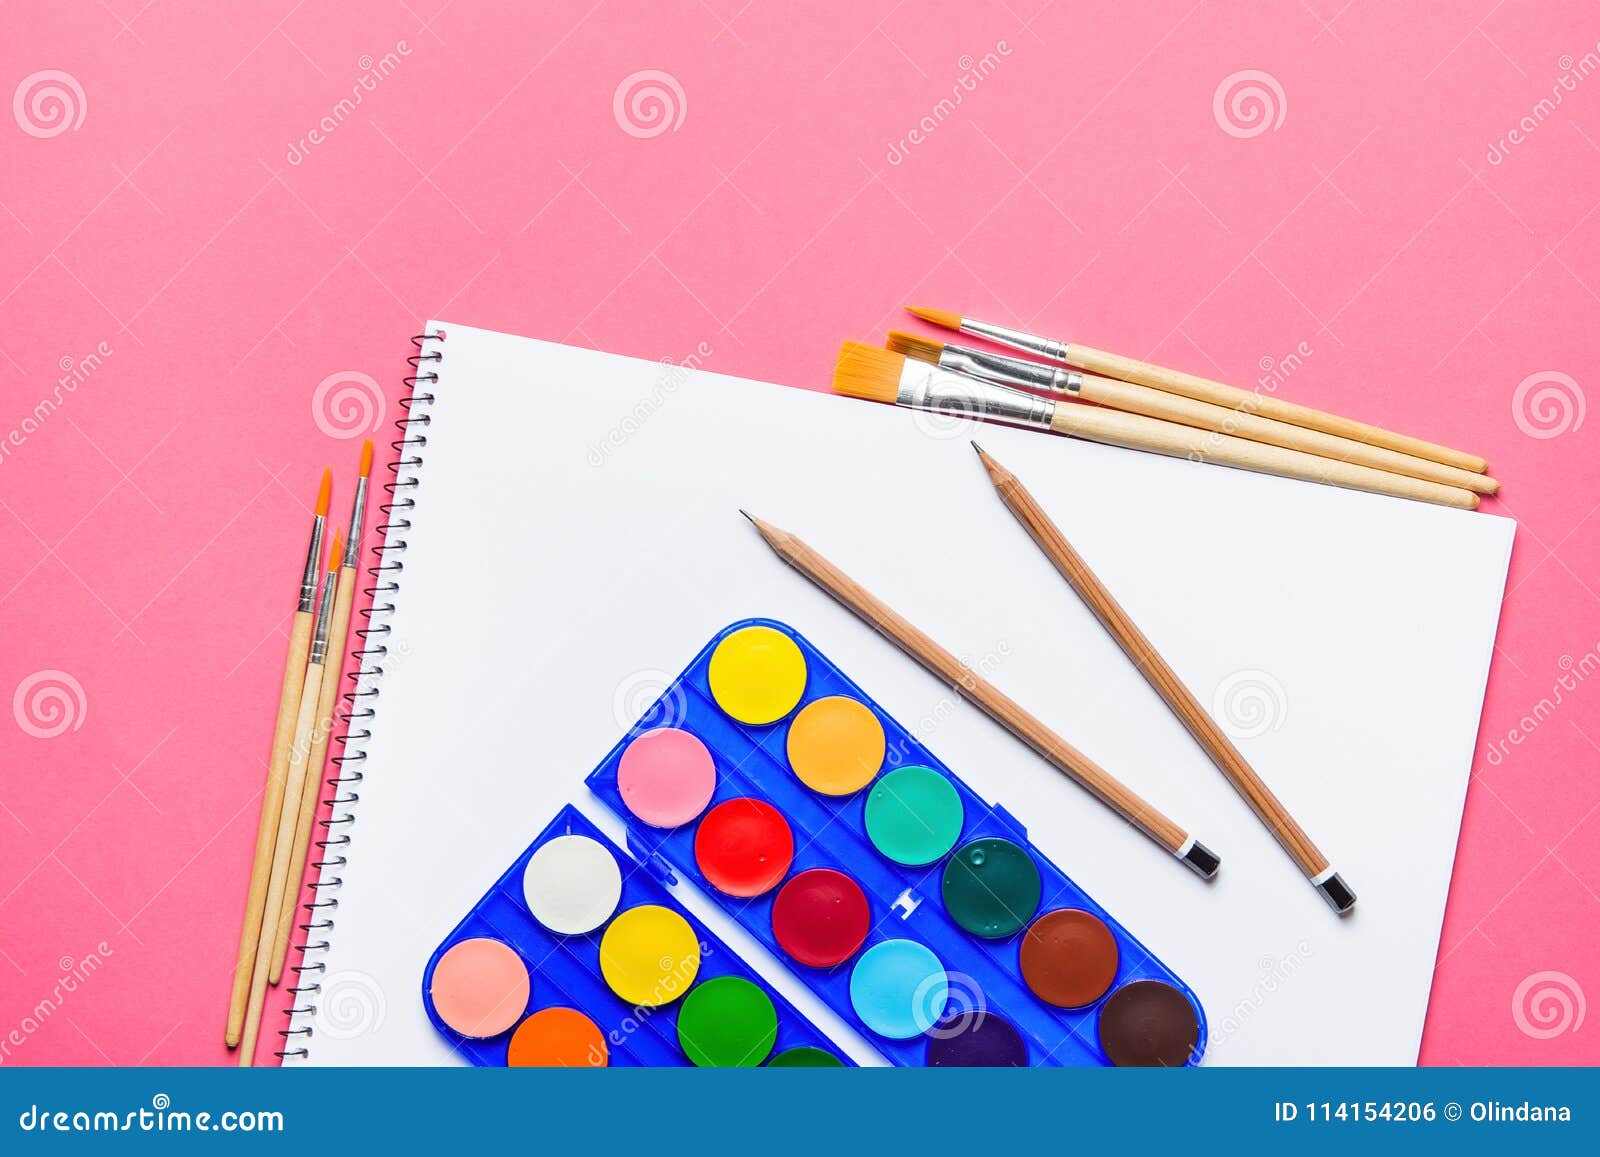 Palette with Rows of Multicolored Watercolor Paints Brushes Pencils  Sketchbook on Pink Background. Arts School Class Creativity Stock Photo -  Image of copy, abstract: 114154206